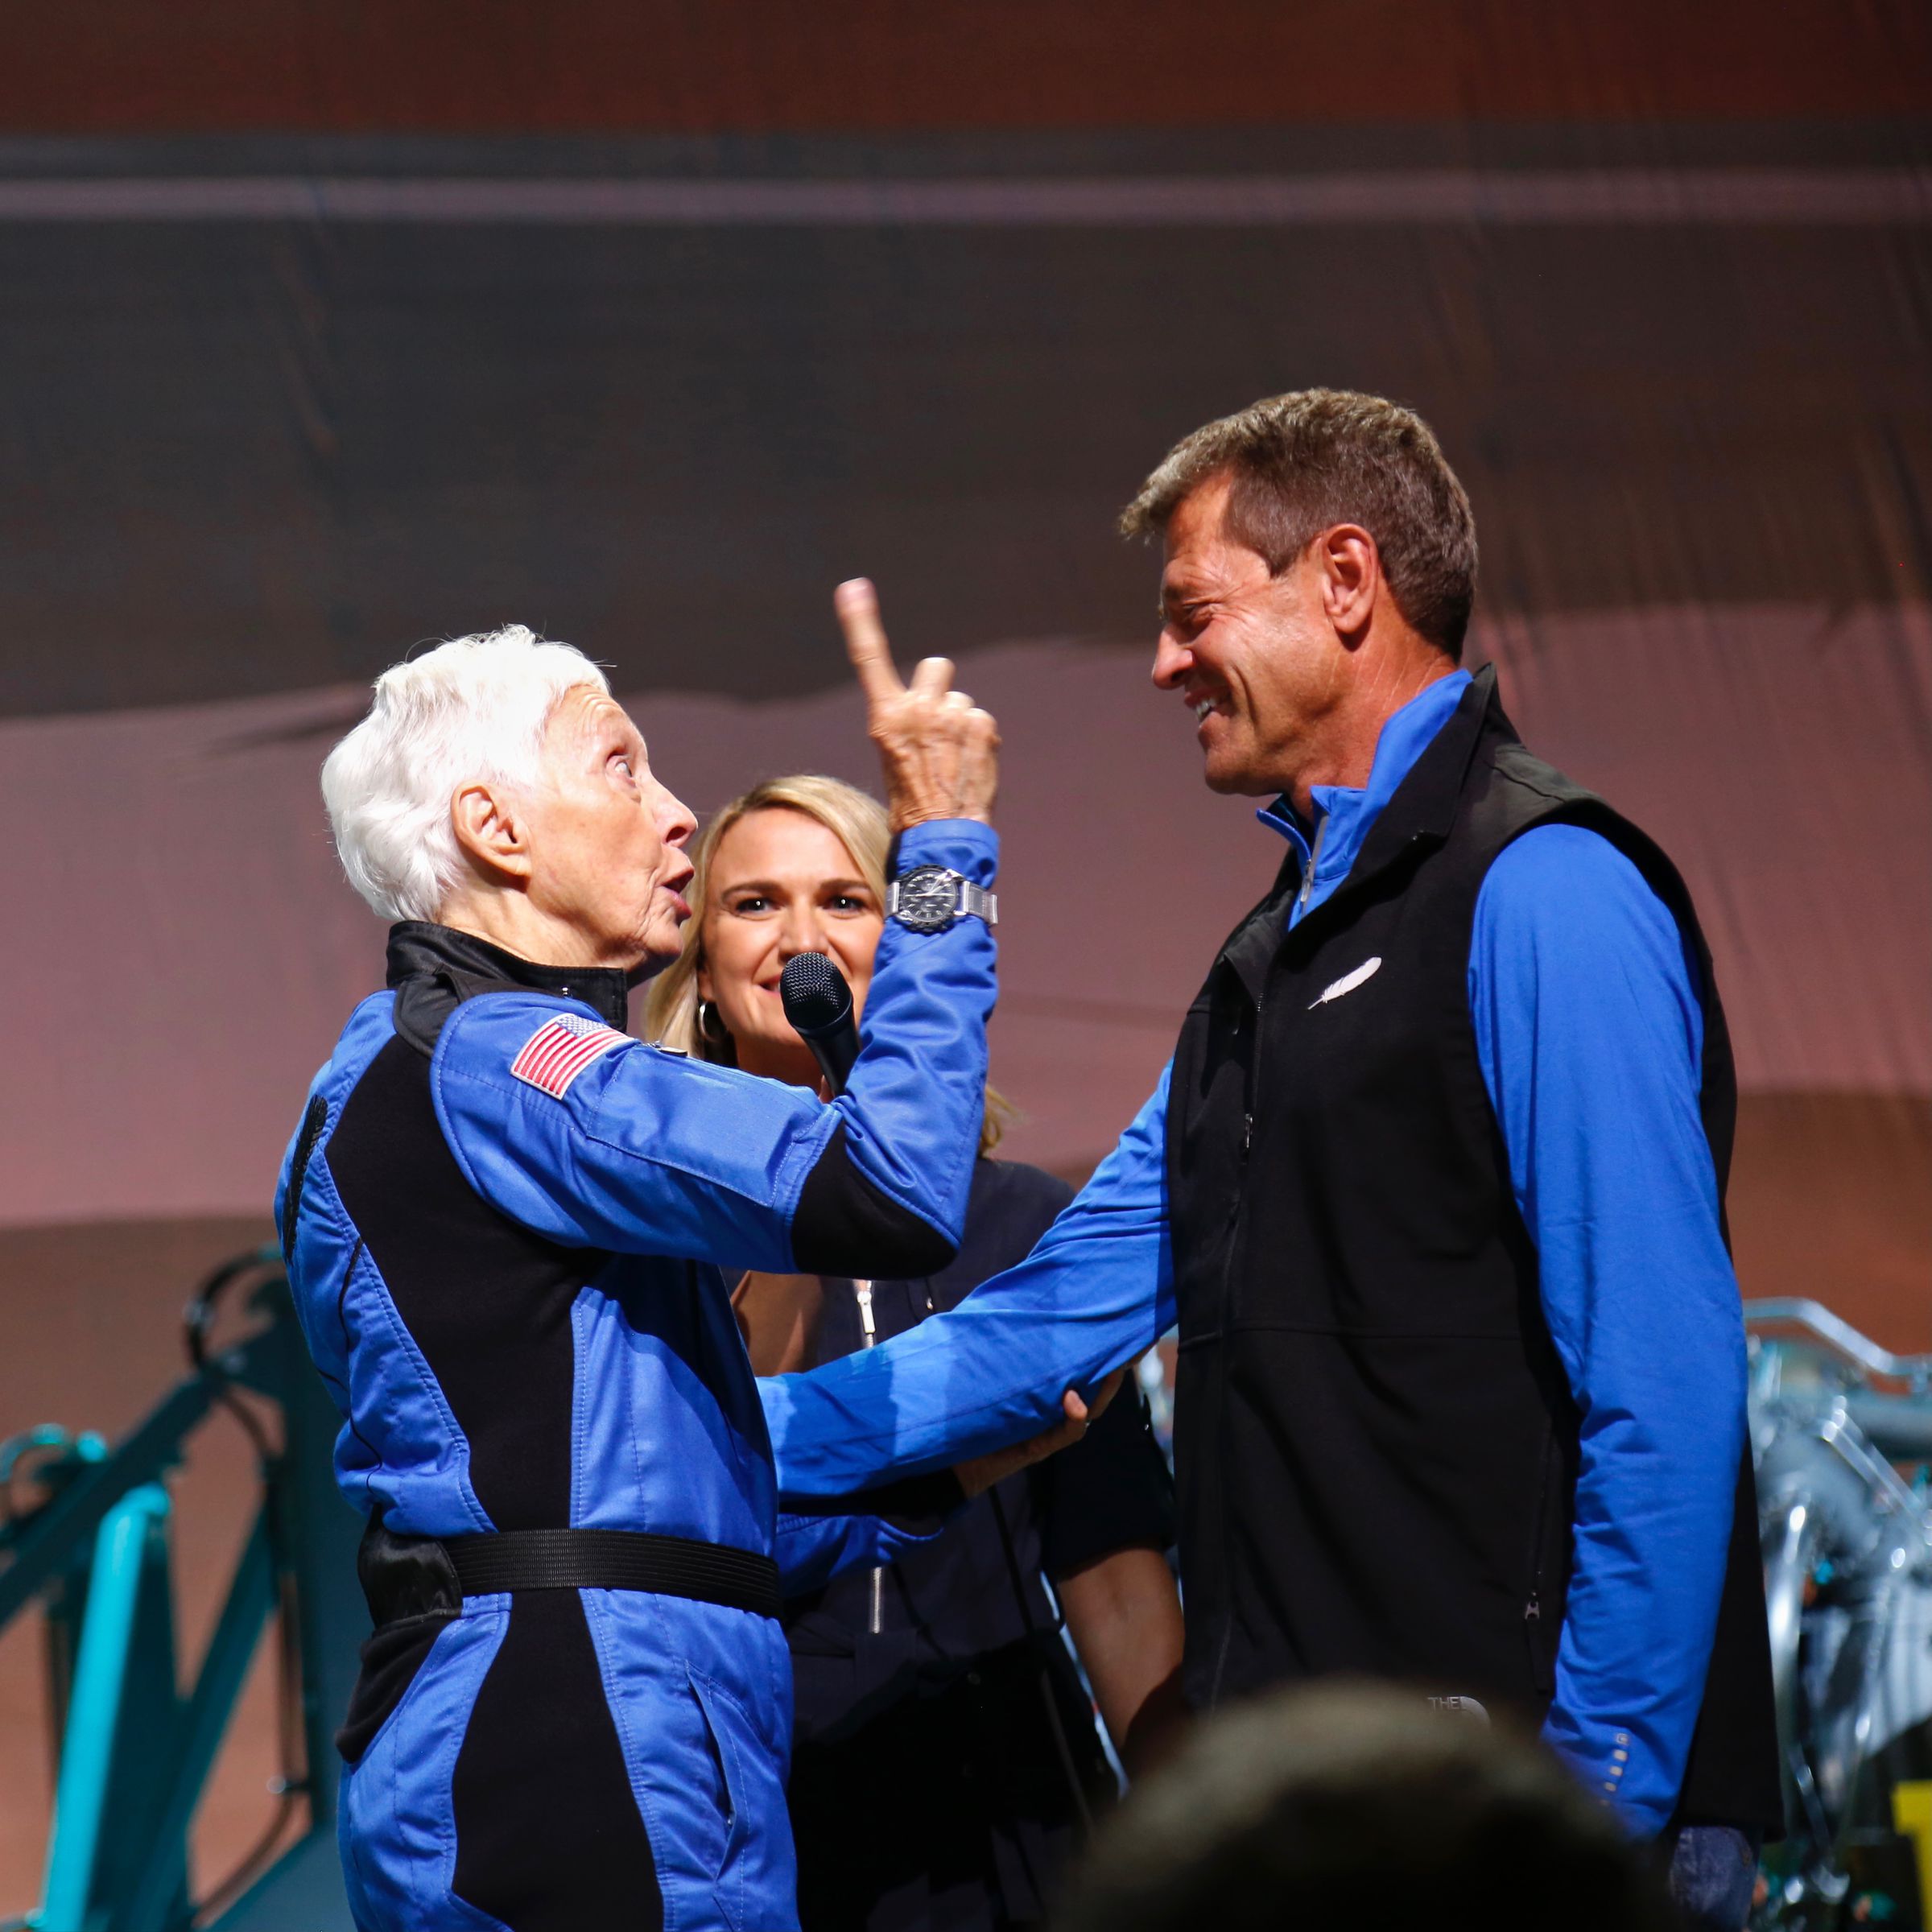 Wally Funk, with former Space Shuttle commander and Blue Origin senior director for mission assurance Jeff Ashby, on stage during a post-mission event.